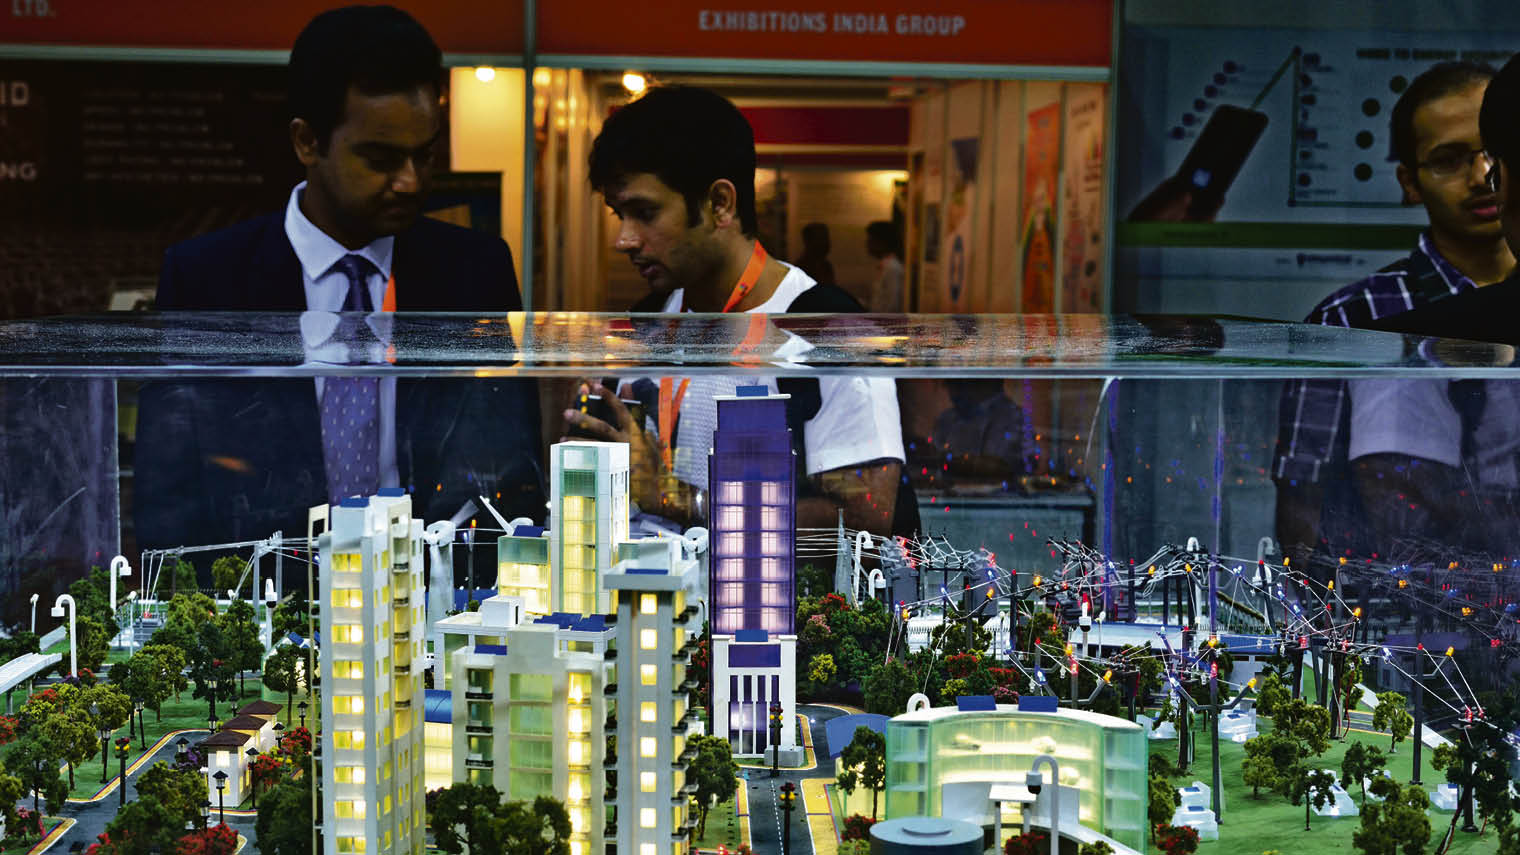 Proposals on display at the Smart Cities India 2015 Exhibition in New Delhi